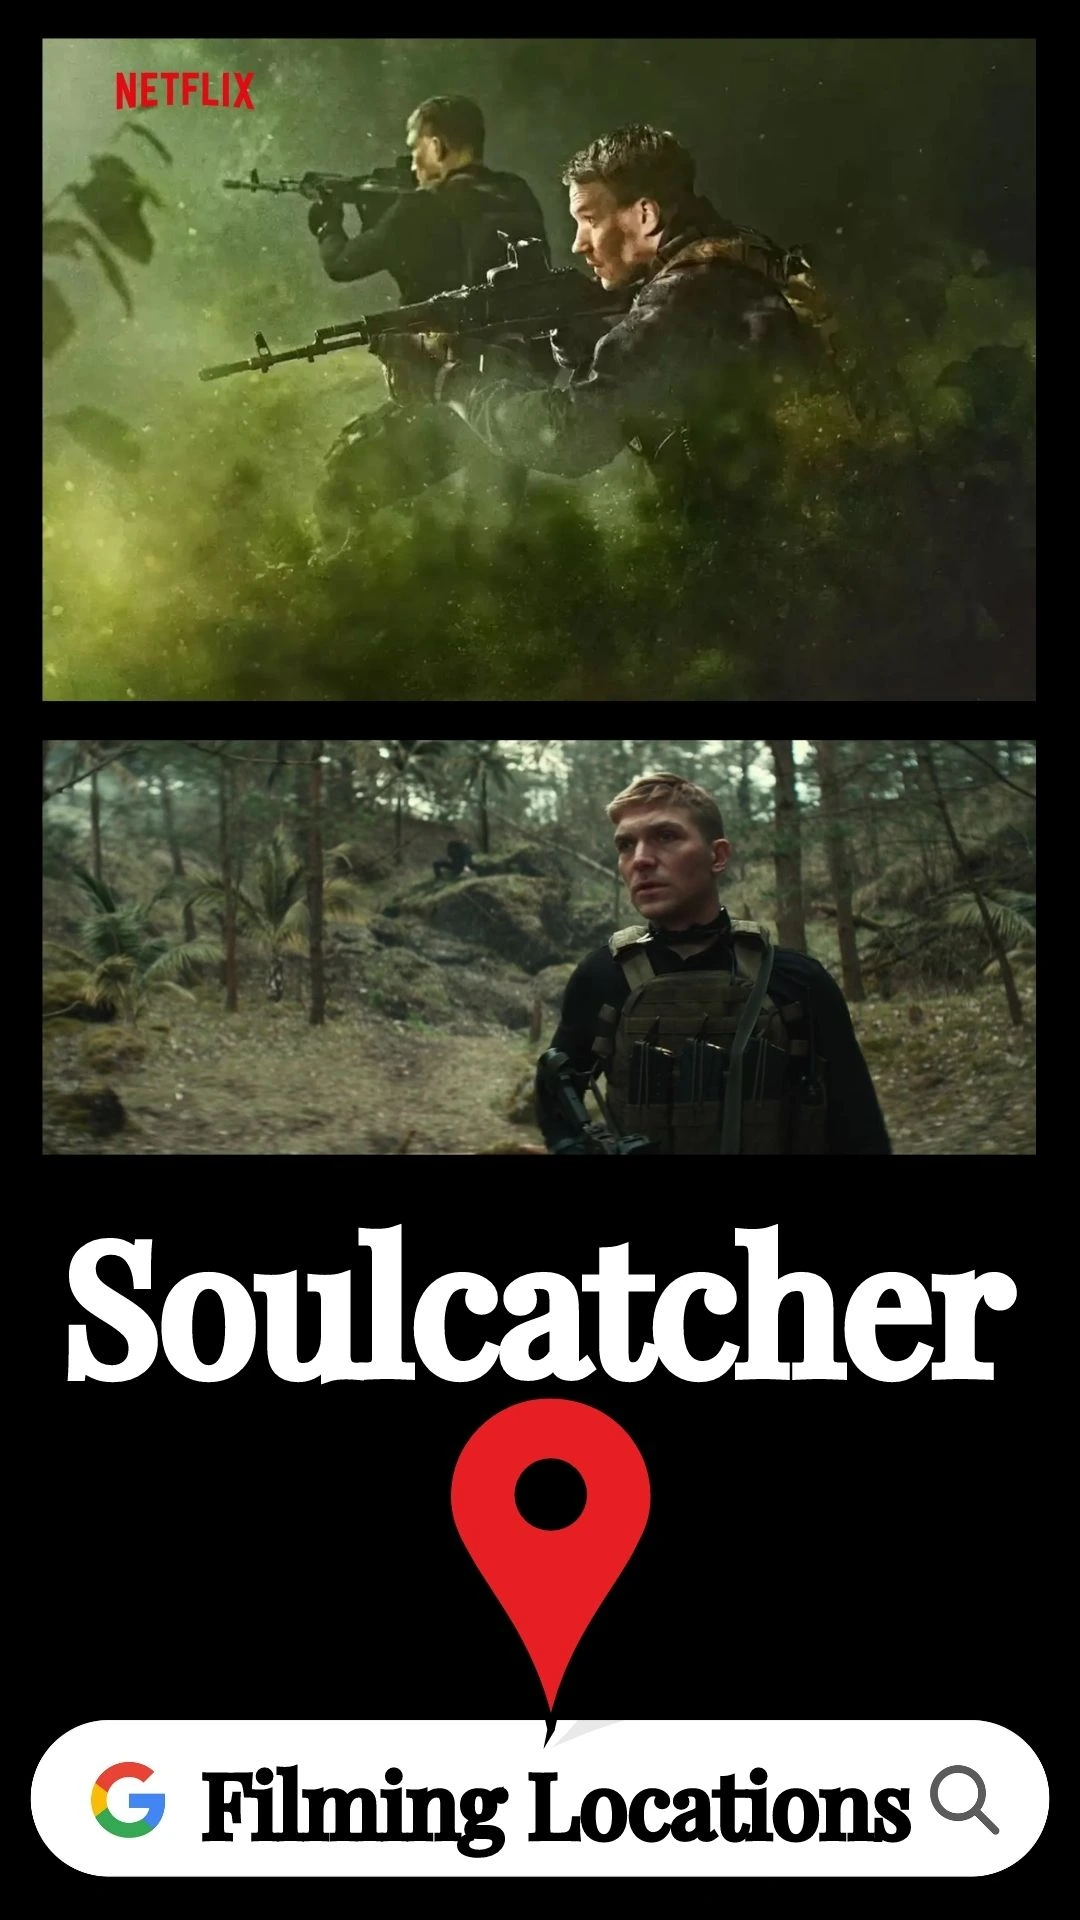 Soulcatcher Filming Locations